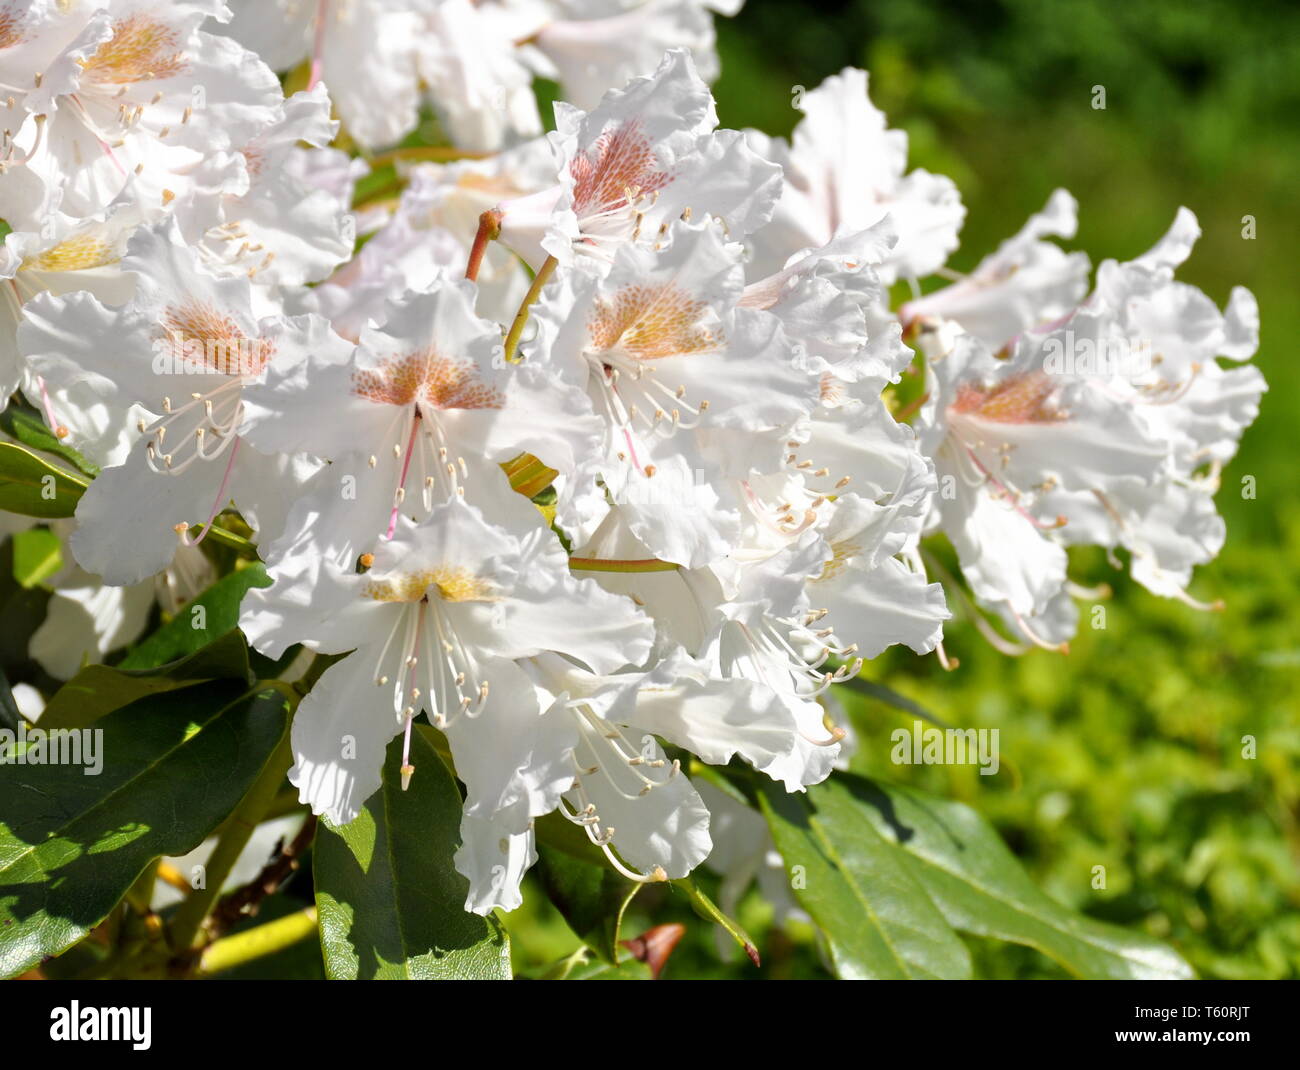 Closeup on white Rhododendron flowers Stock Photo